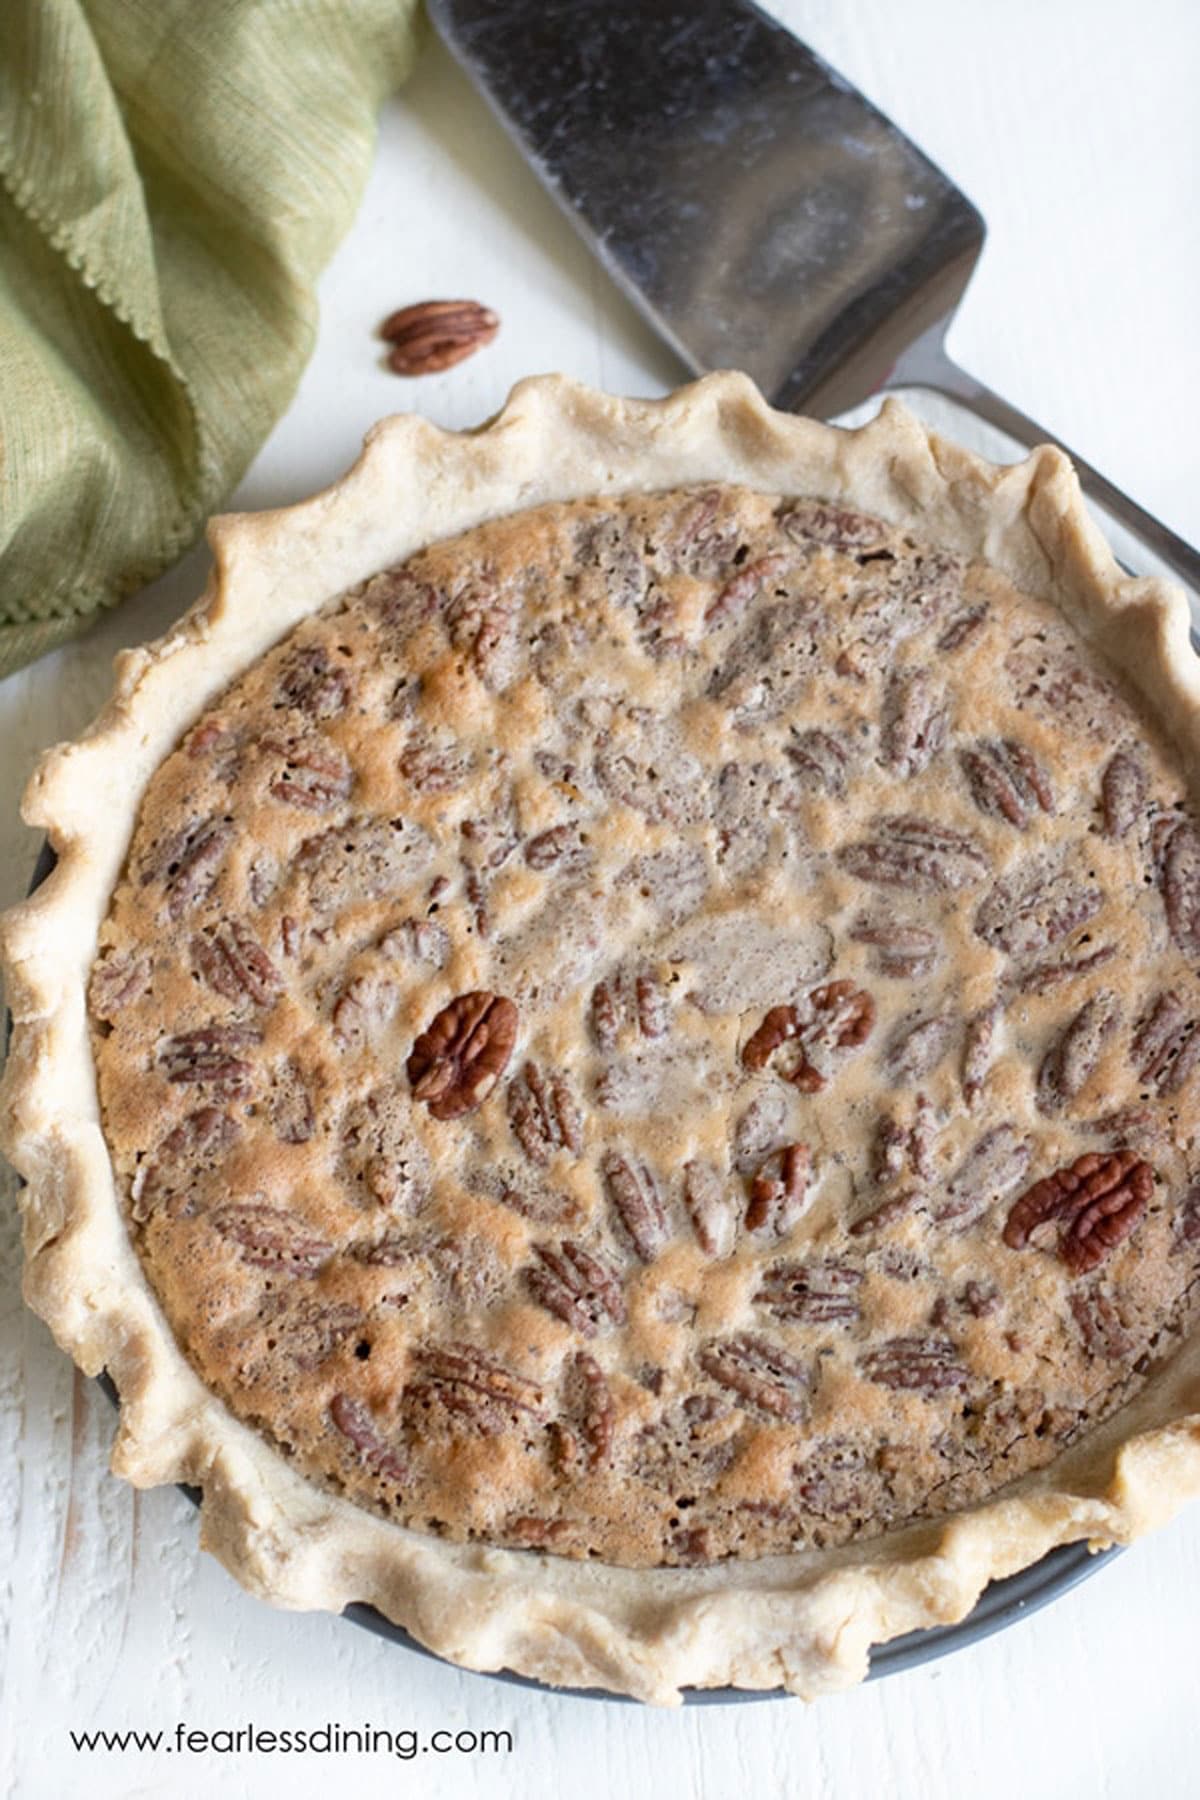 a whole pecan pie on a table